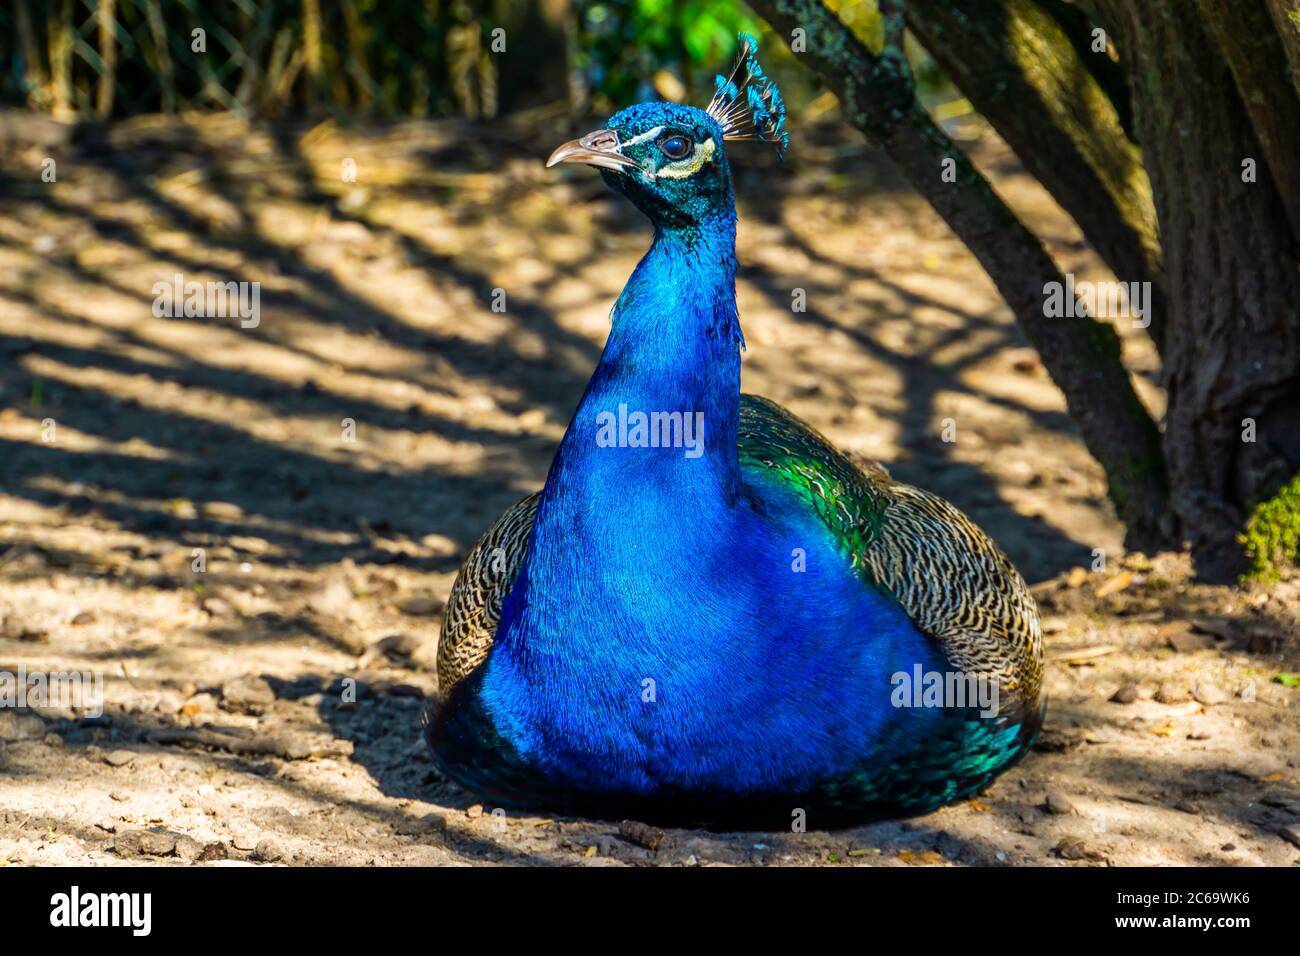 beautiful closeup portrait of a indian peacock, popular ornamental bird specie from Asia Stock Photo